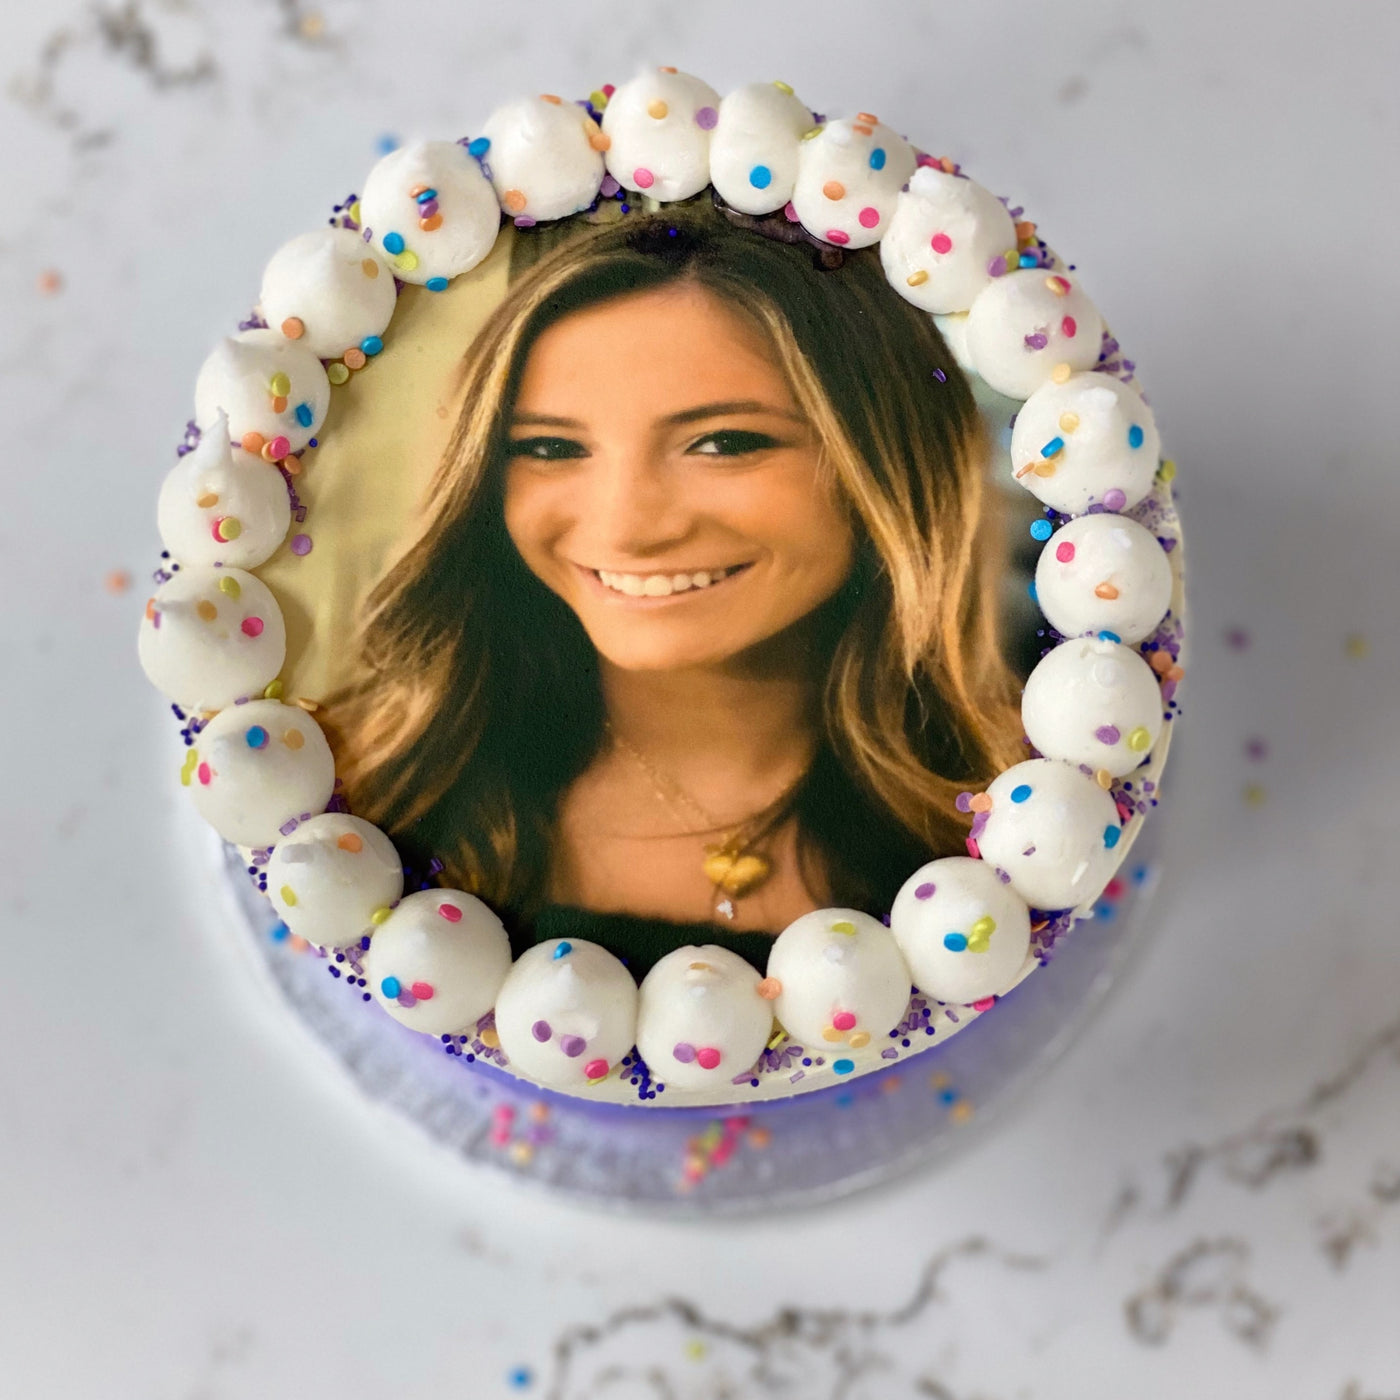 Selfie Sprinkle Cake - NY Cake Academy | Professional Cake Decorating Classes For Everyone